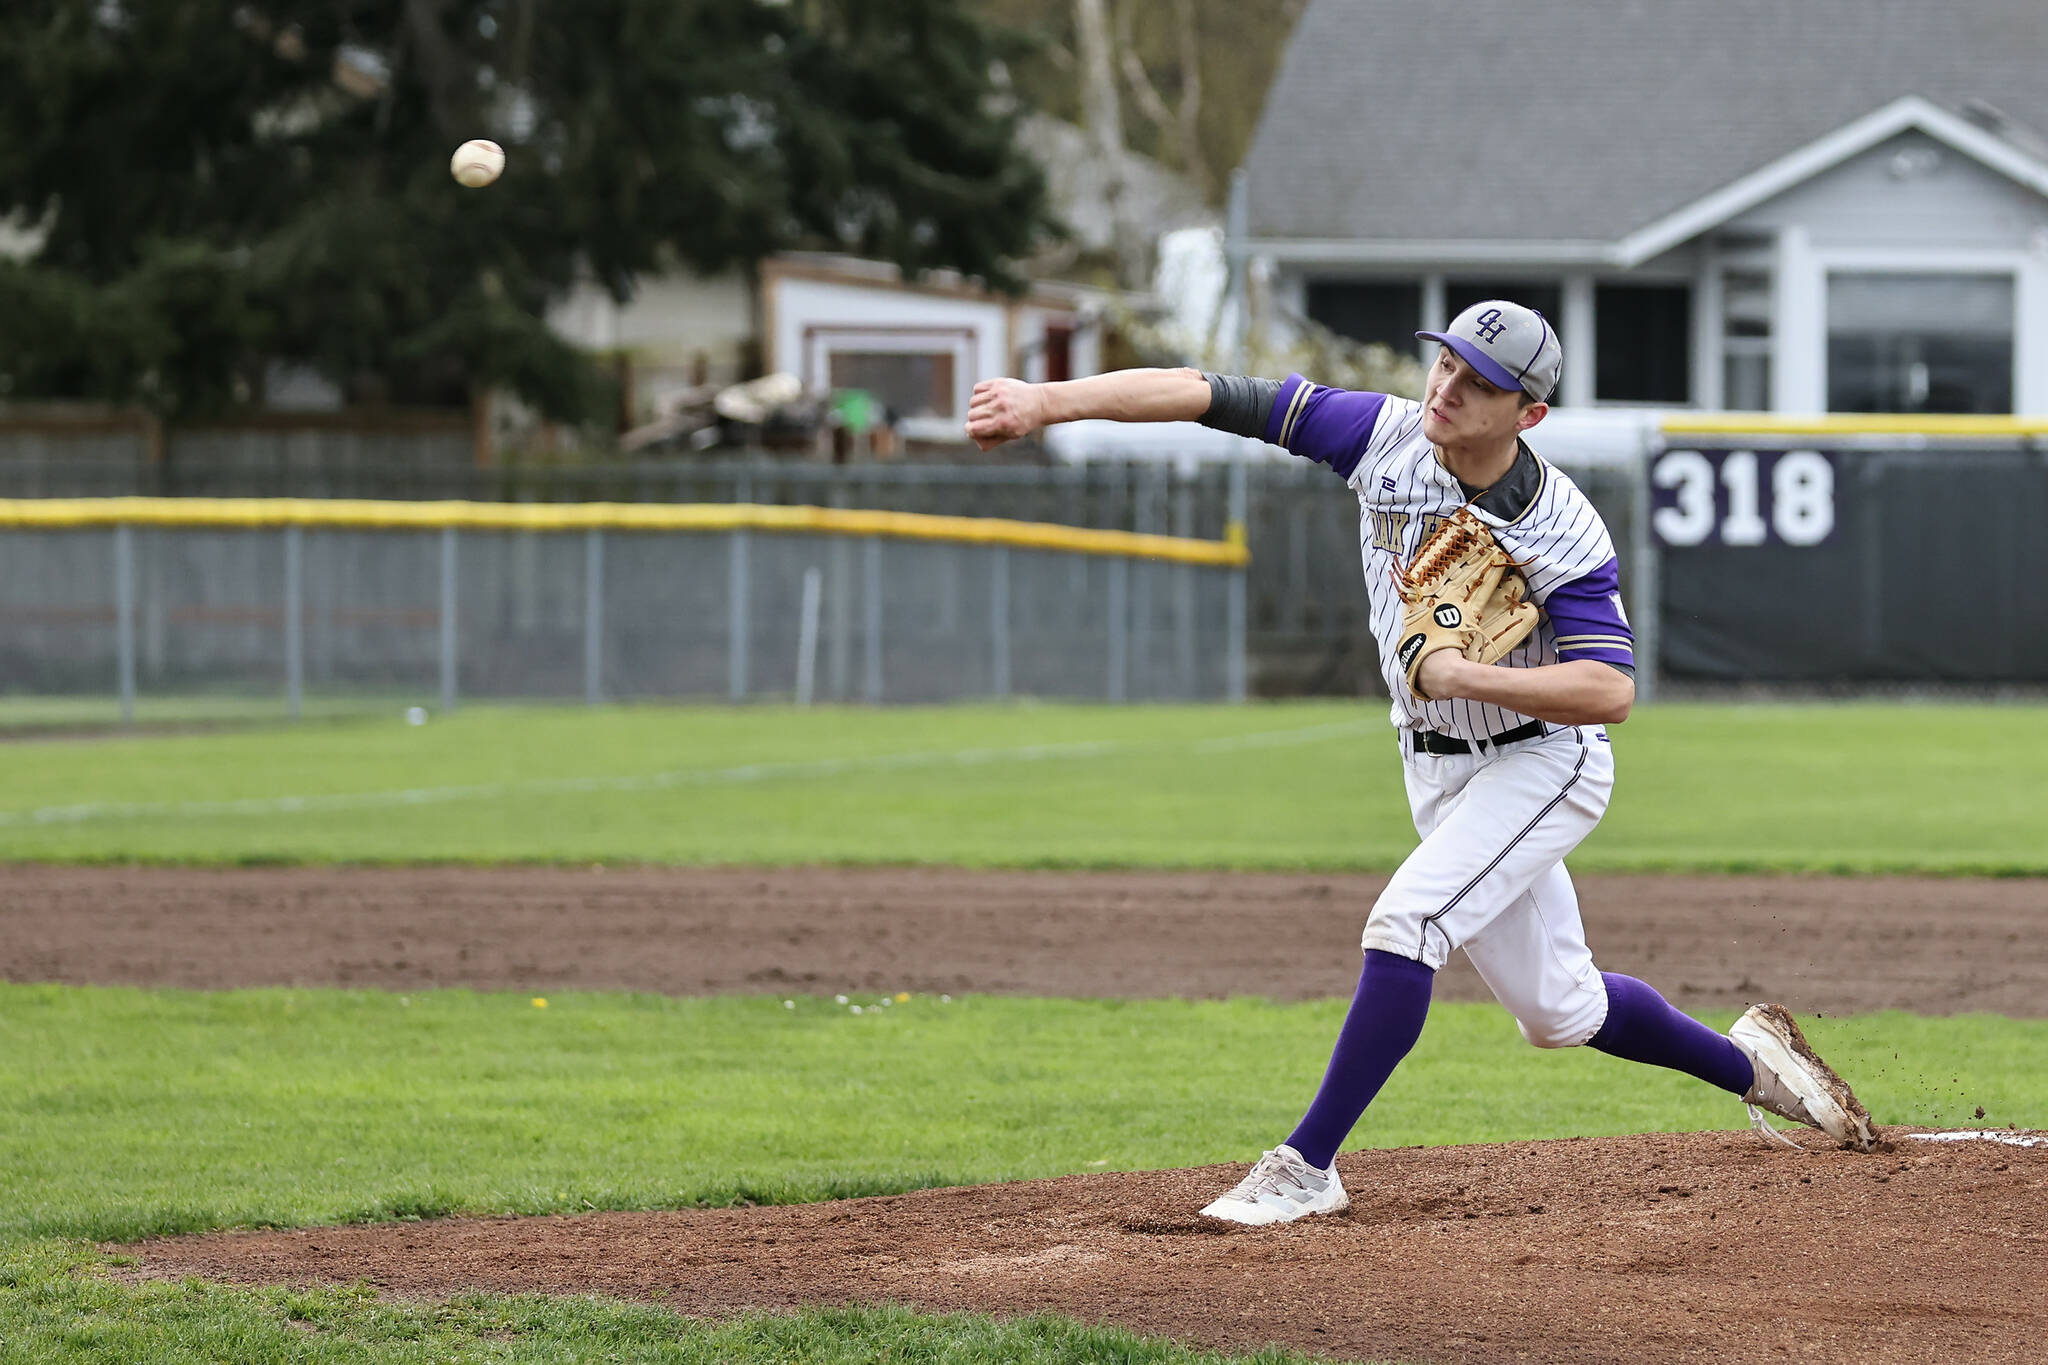 Photo by John Fisken
John Blankman pitches during a baseball game against Anacortes April 4. Oak Harbor won after a close game.